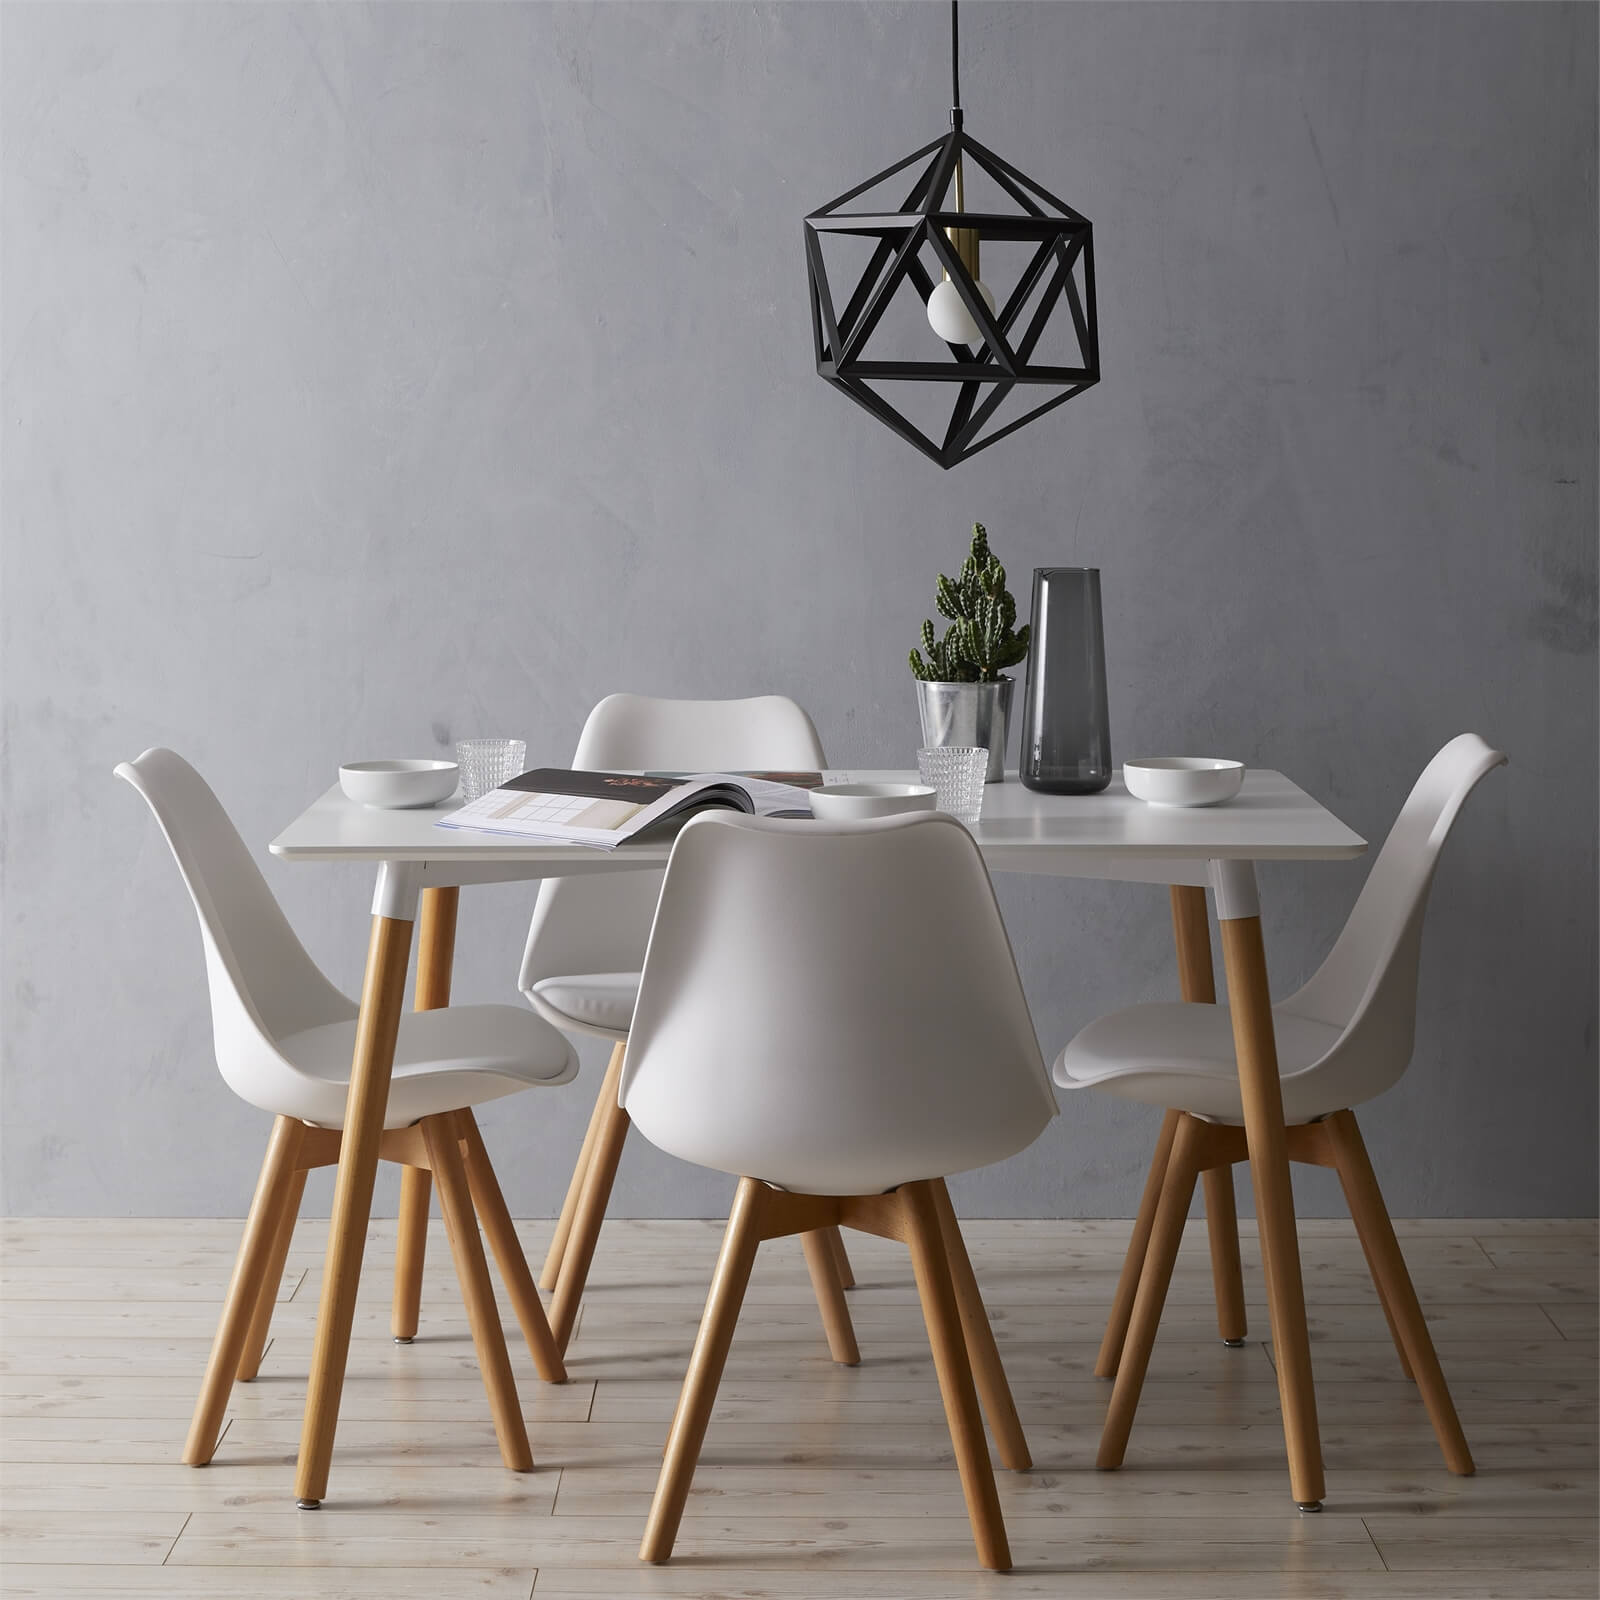 Chloe 4 Seater Dining Table - White